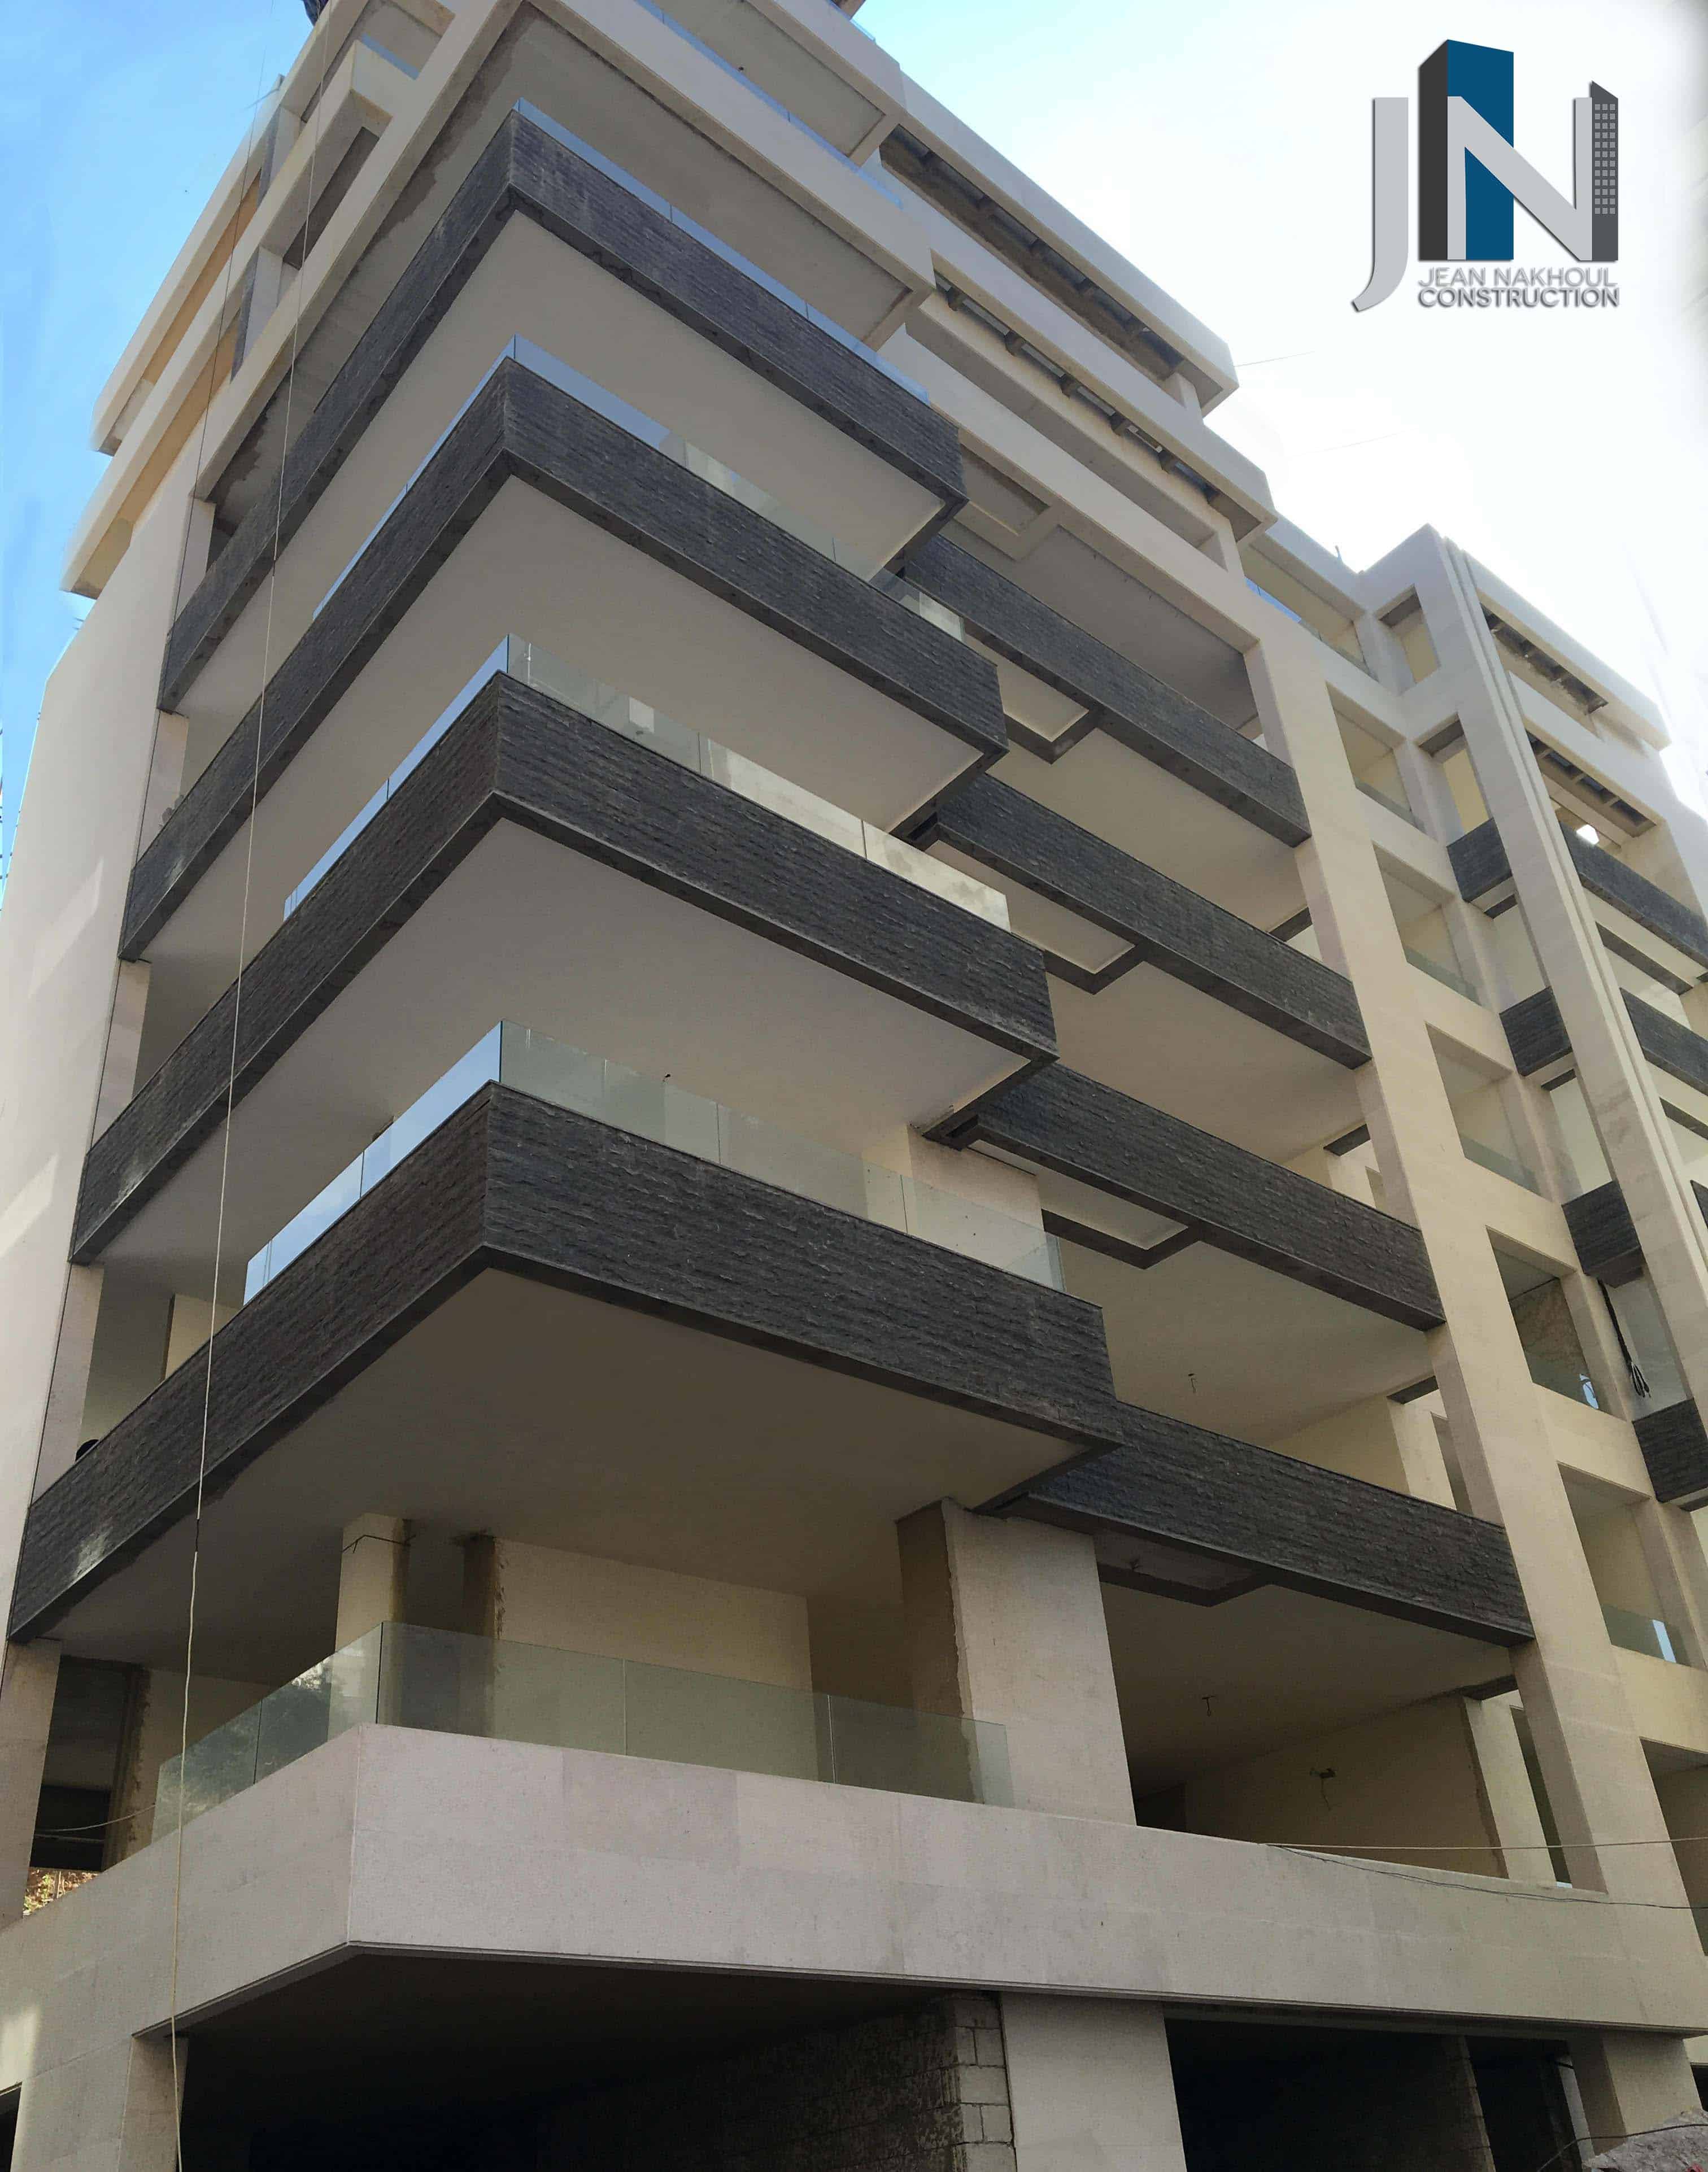 Residential apartments for sale in Haret Sakher